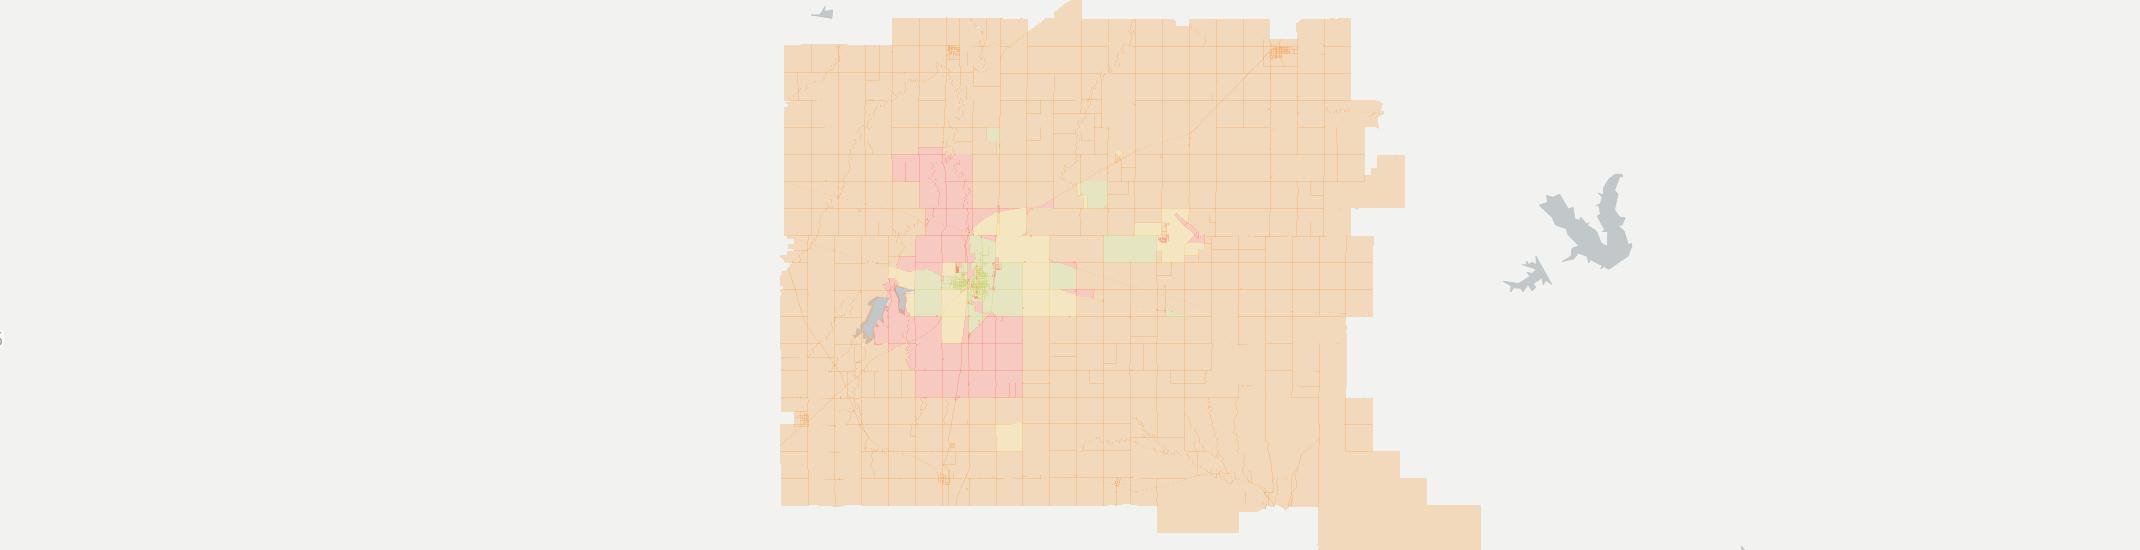 Herington Internet Competition Map. Click for interactive map.